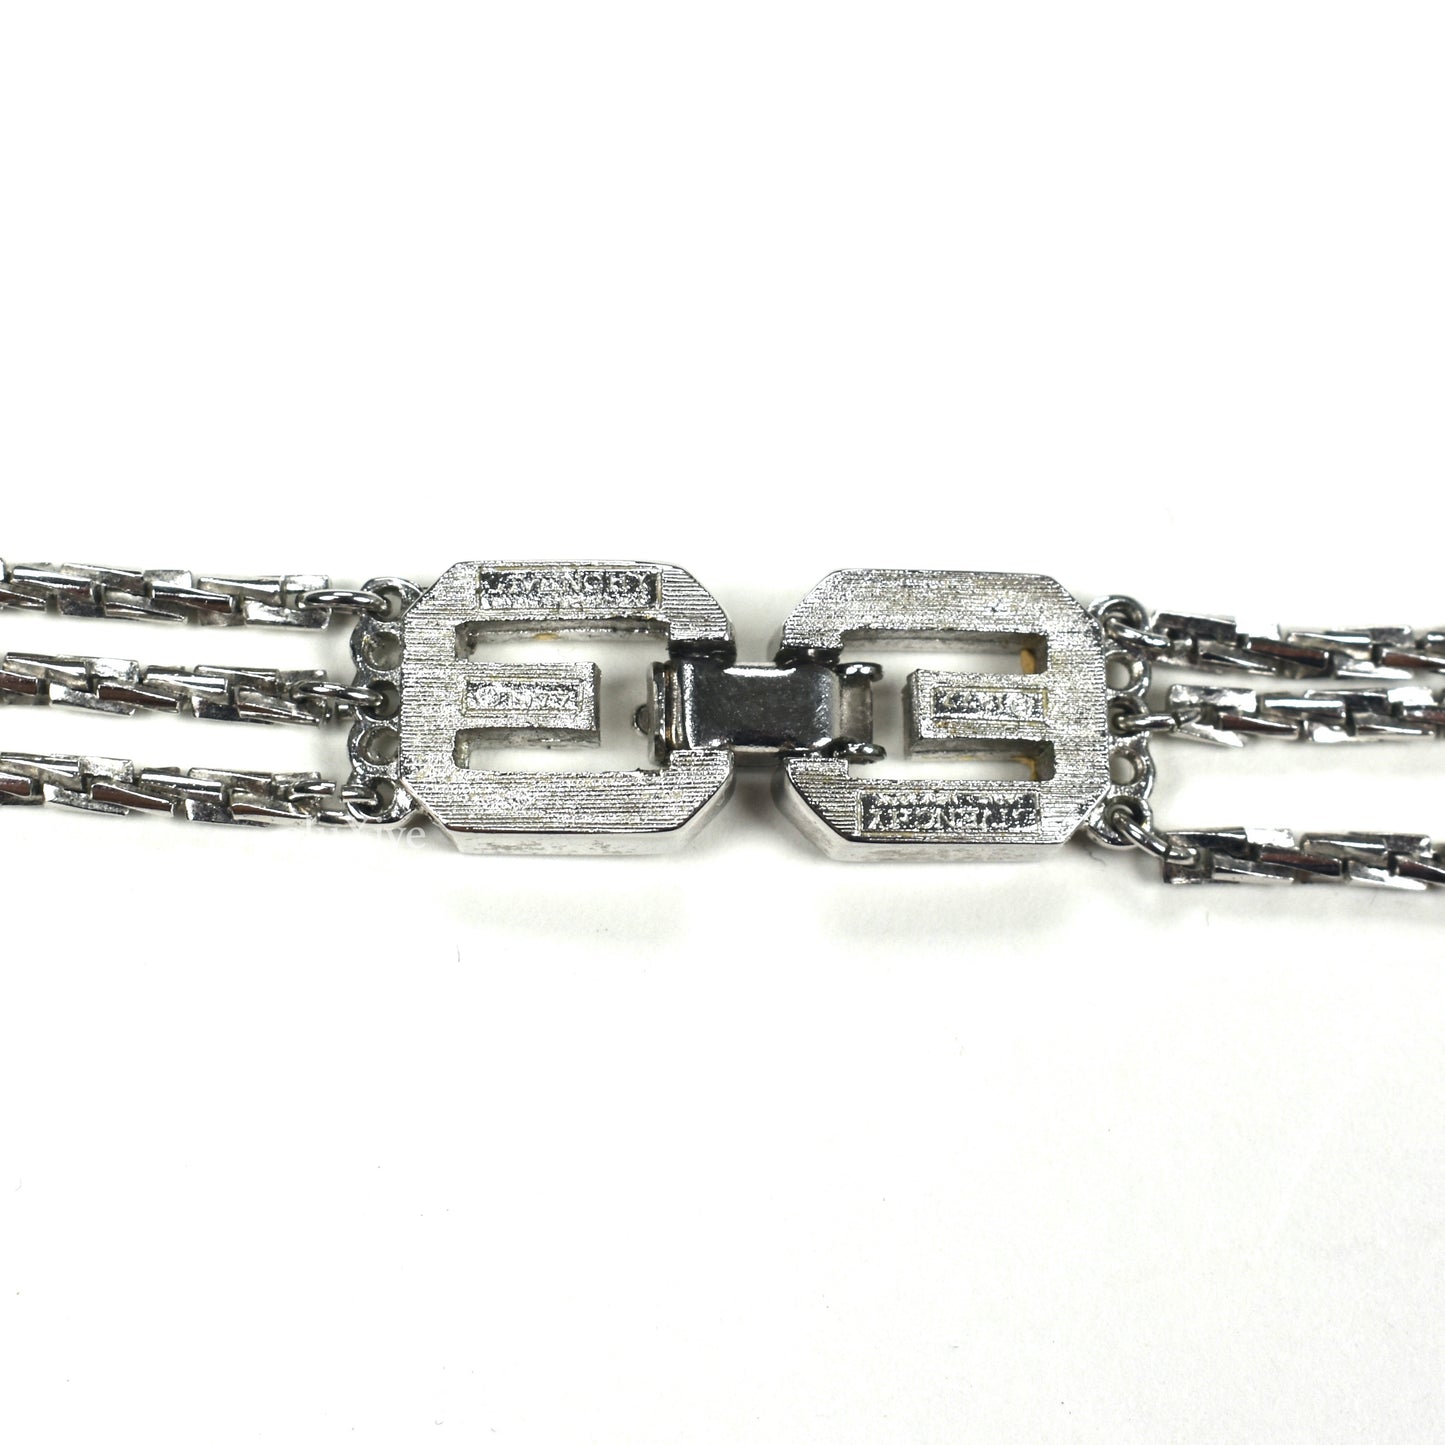 Givenchy - 1977 Runway Silver Triple Strand Chain Necklace